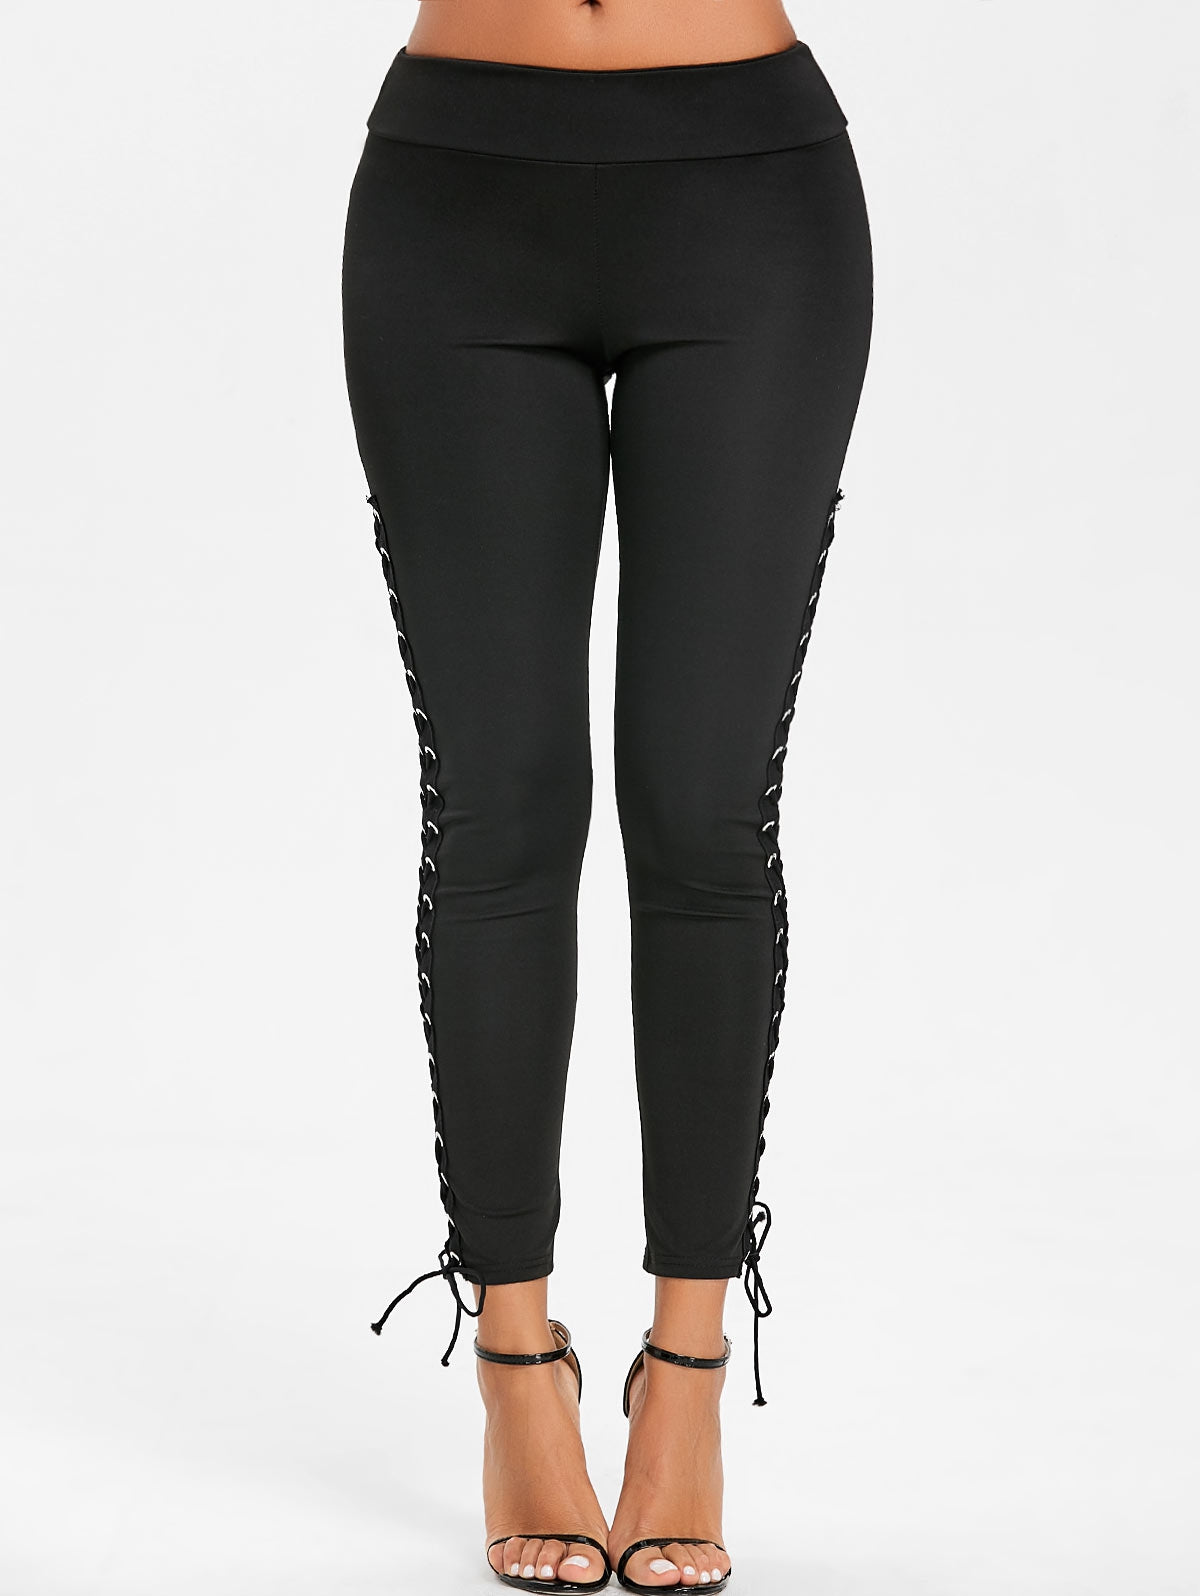 Forever 21 Active Cut Out Capri Forever, 47% OFF